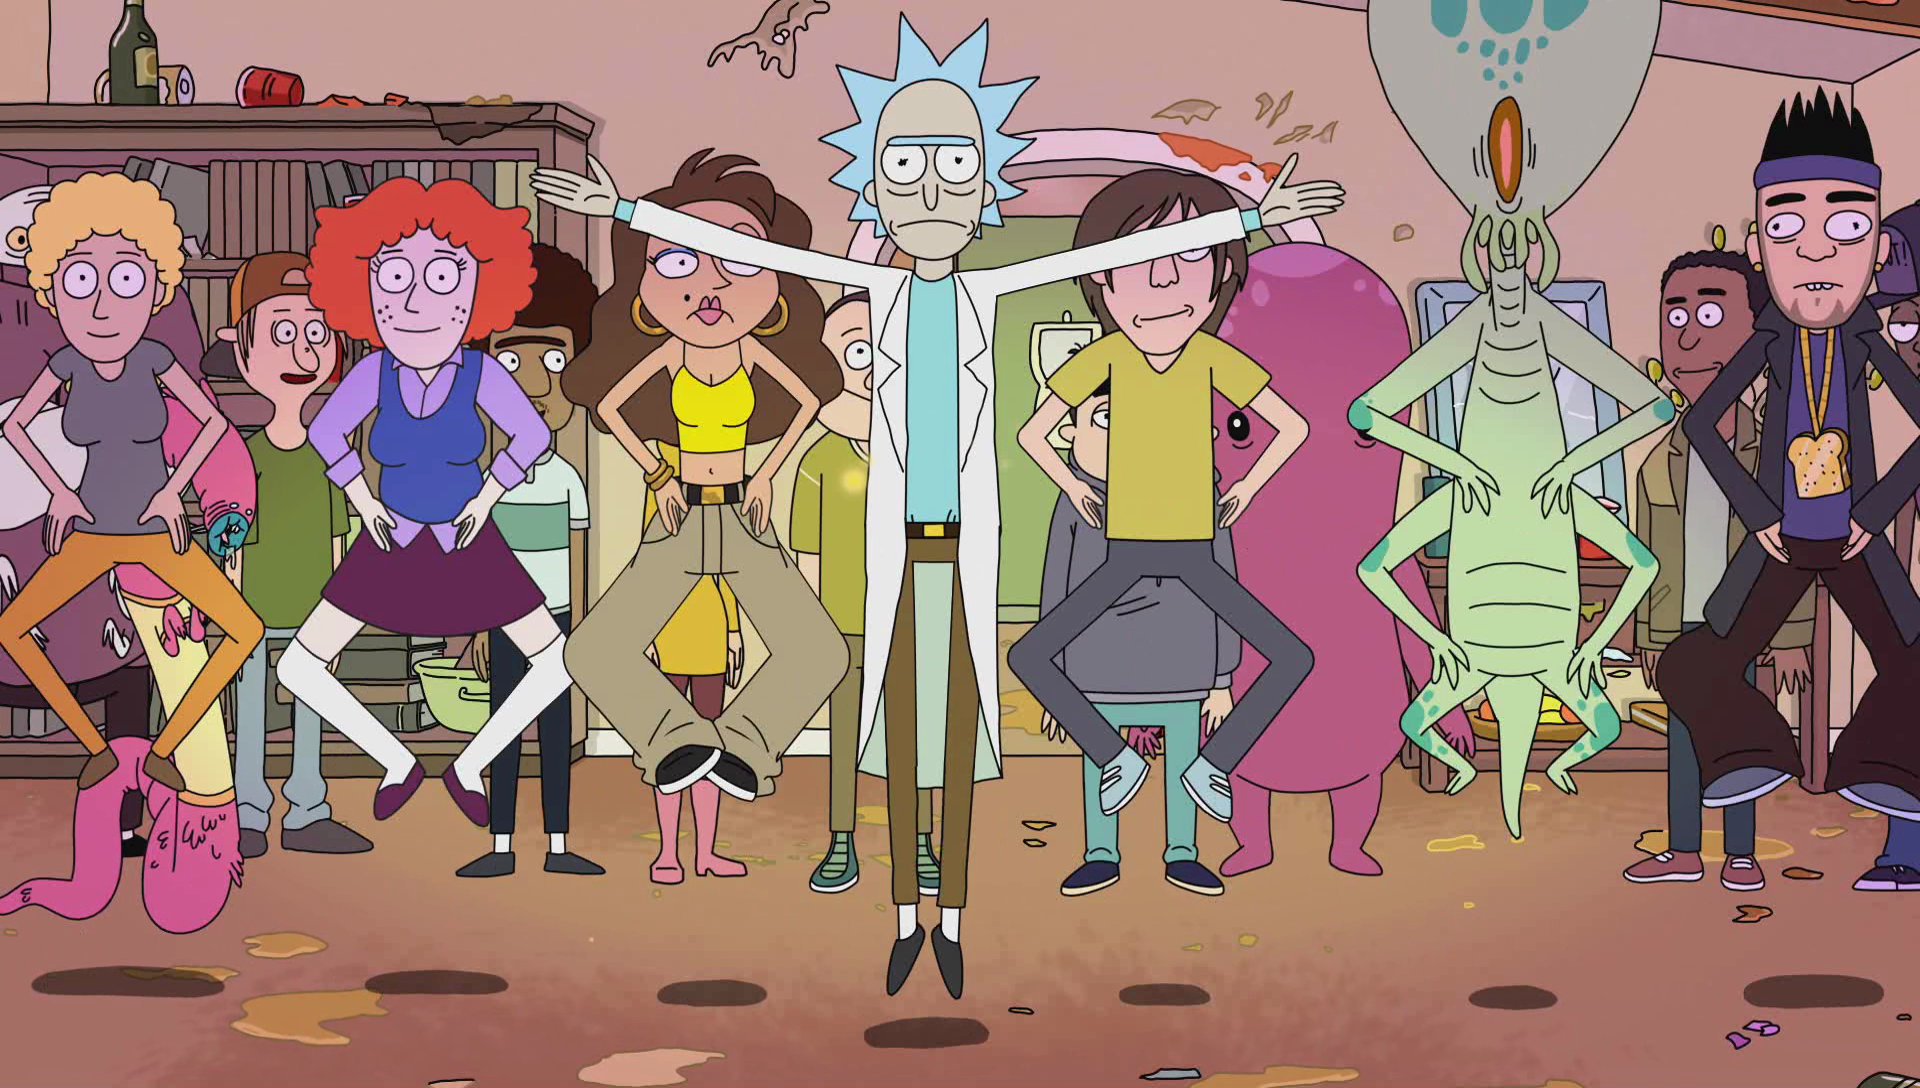 Image S1e11 Rick Dance 10png Rick And Morty Wiki Fandom Powered By Wikia 4456